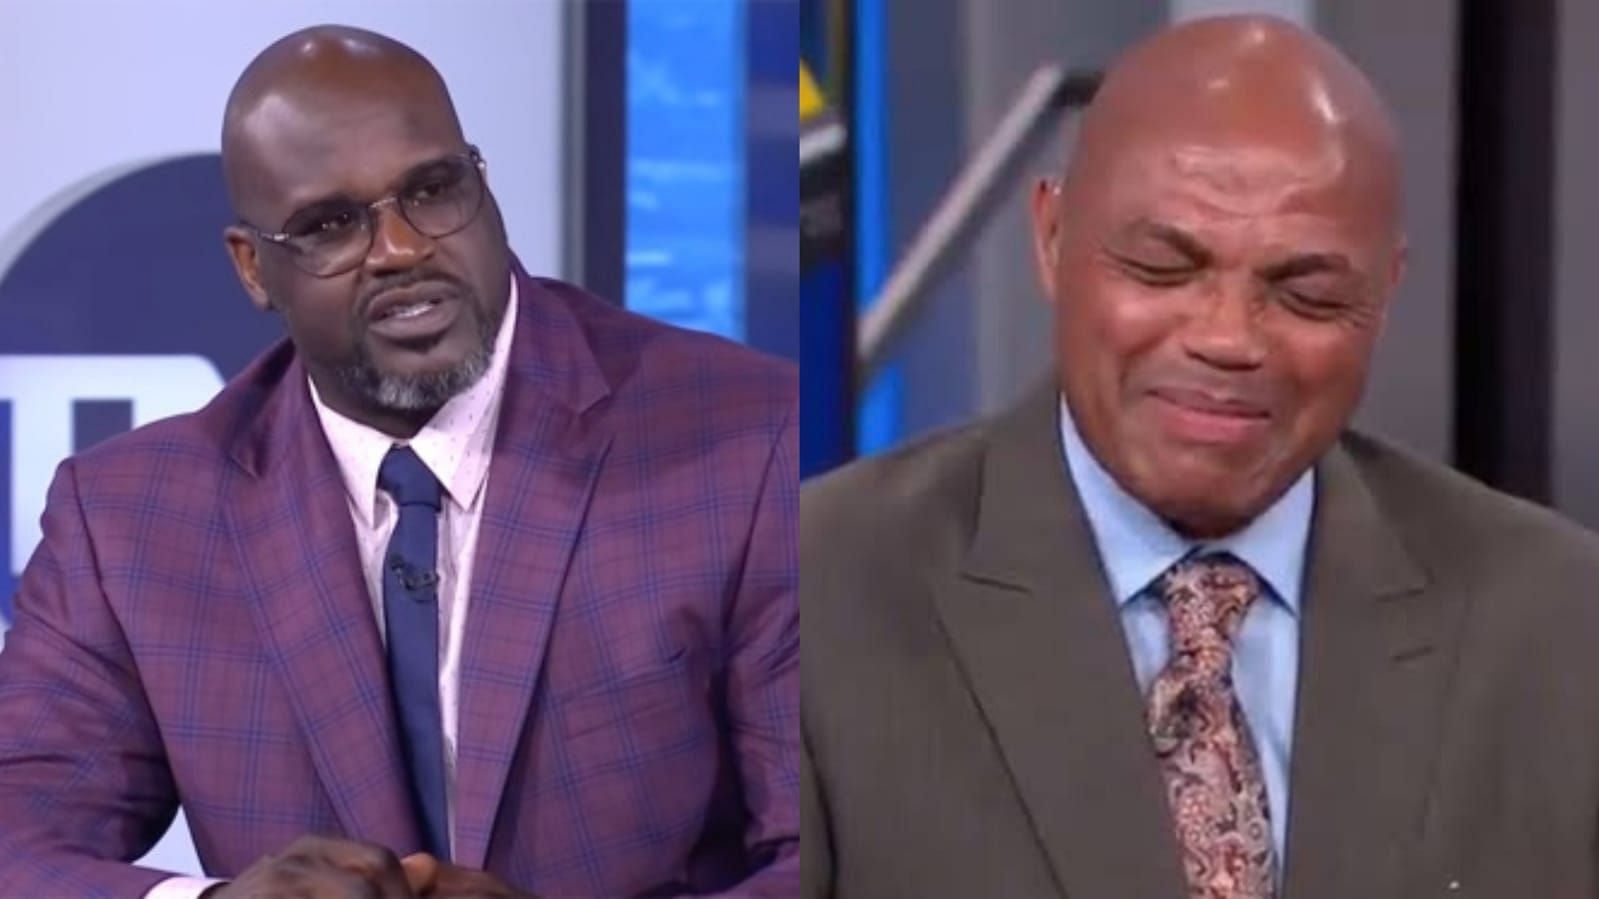 Charles Barkley hilariously reveals he'd like to beat the 'hell out of ...